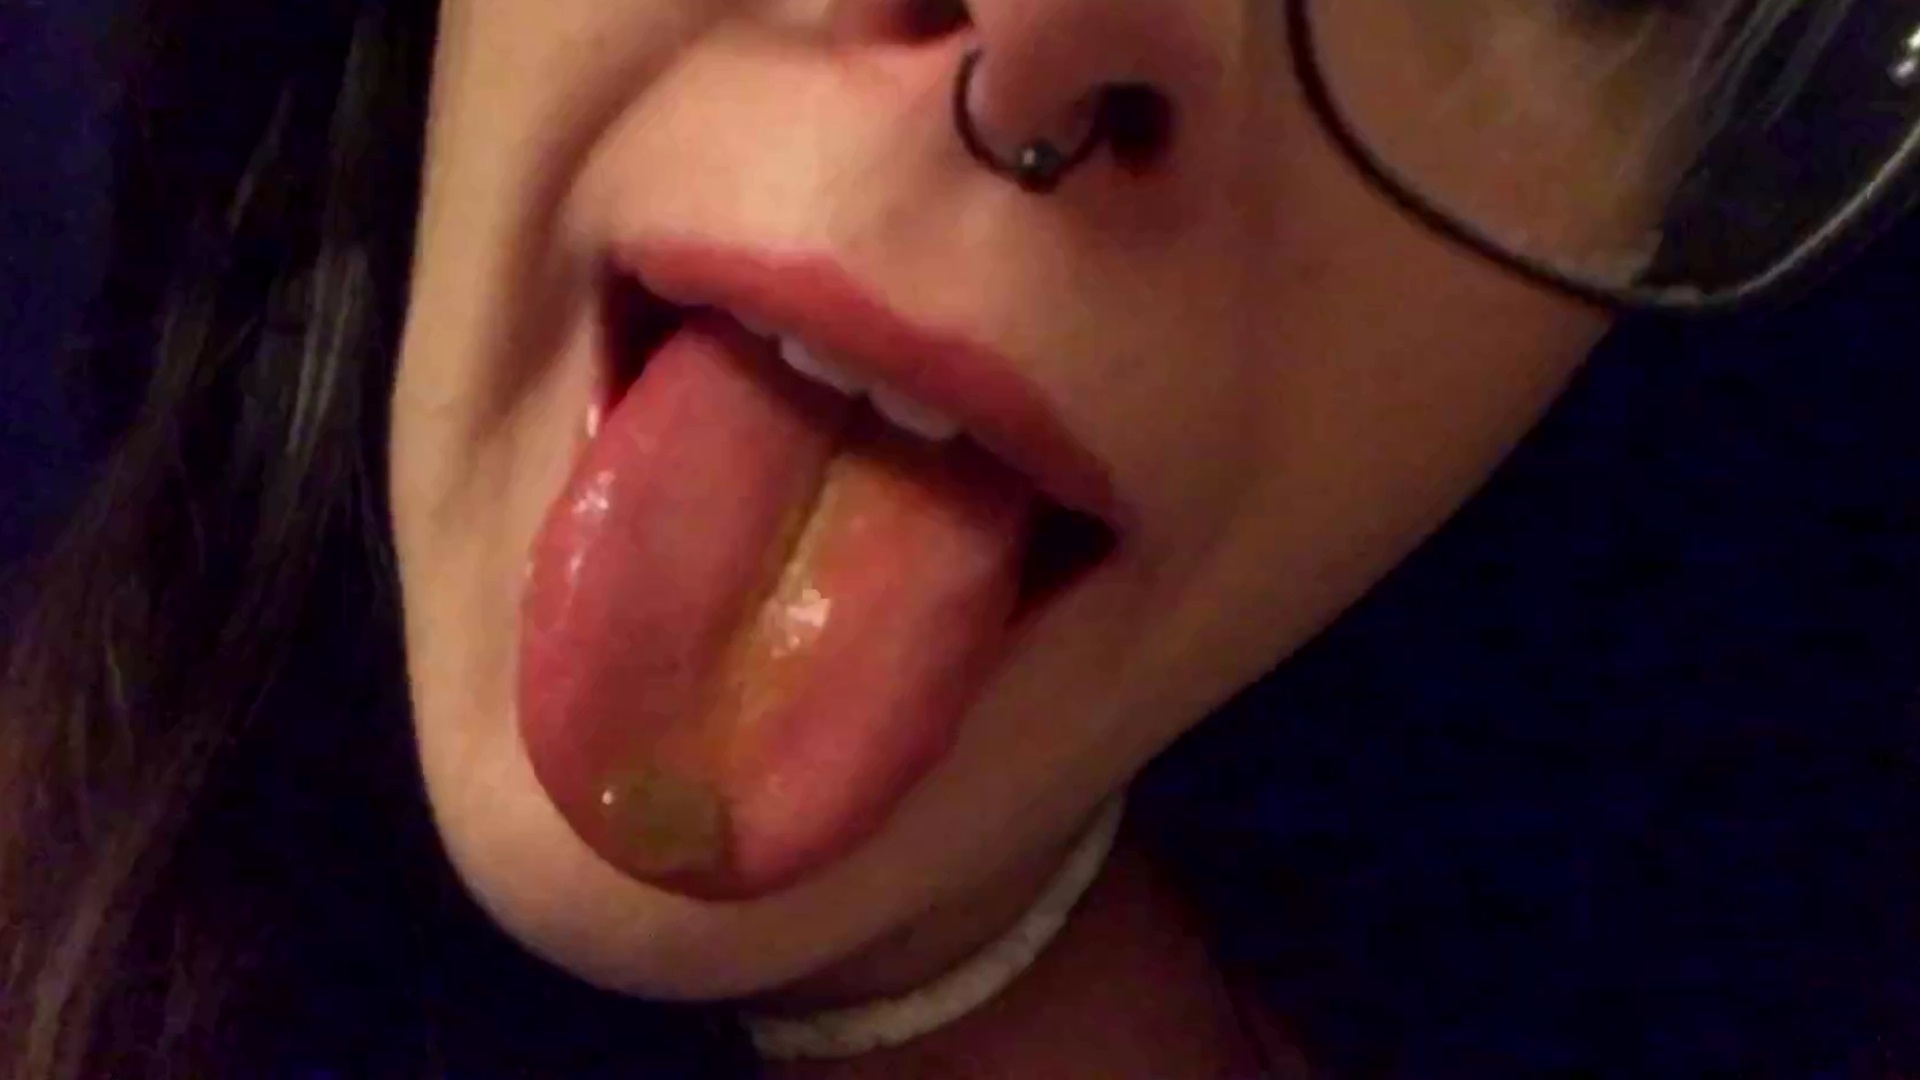 Dirty Ass To Mouth